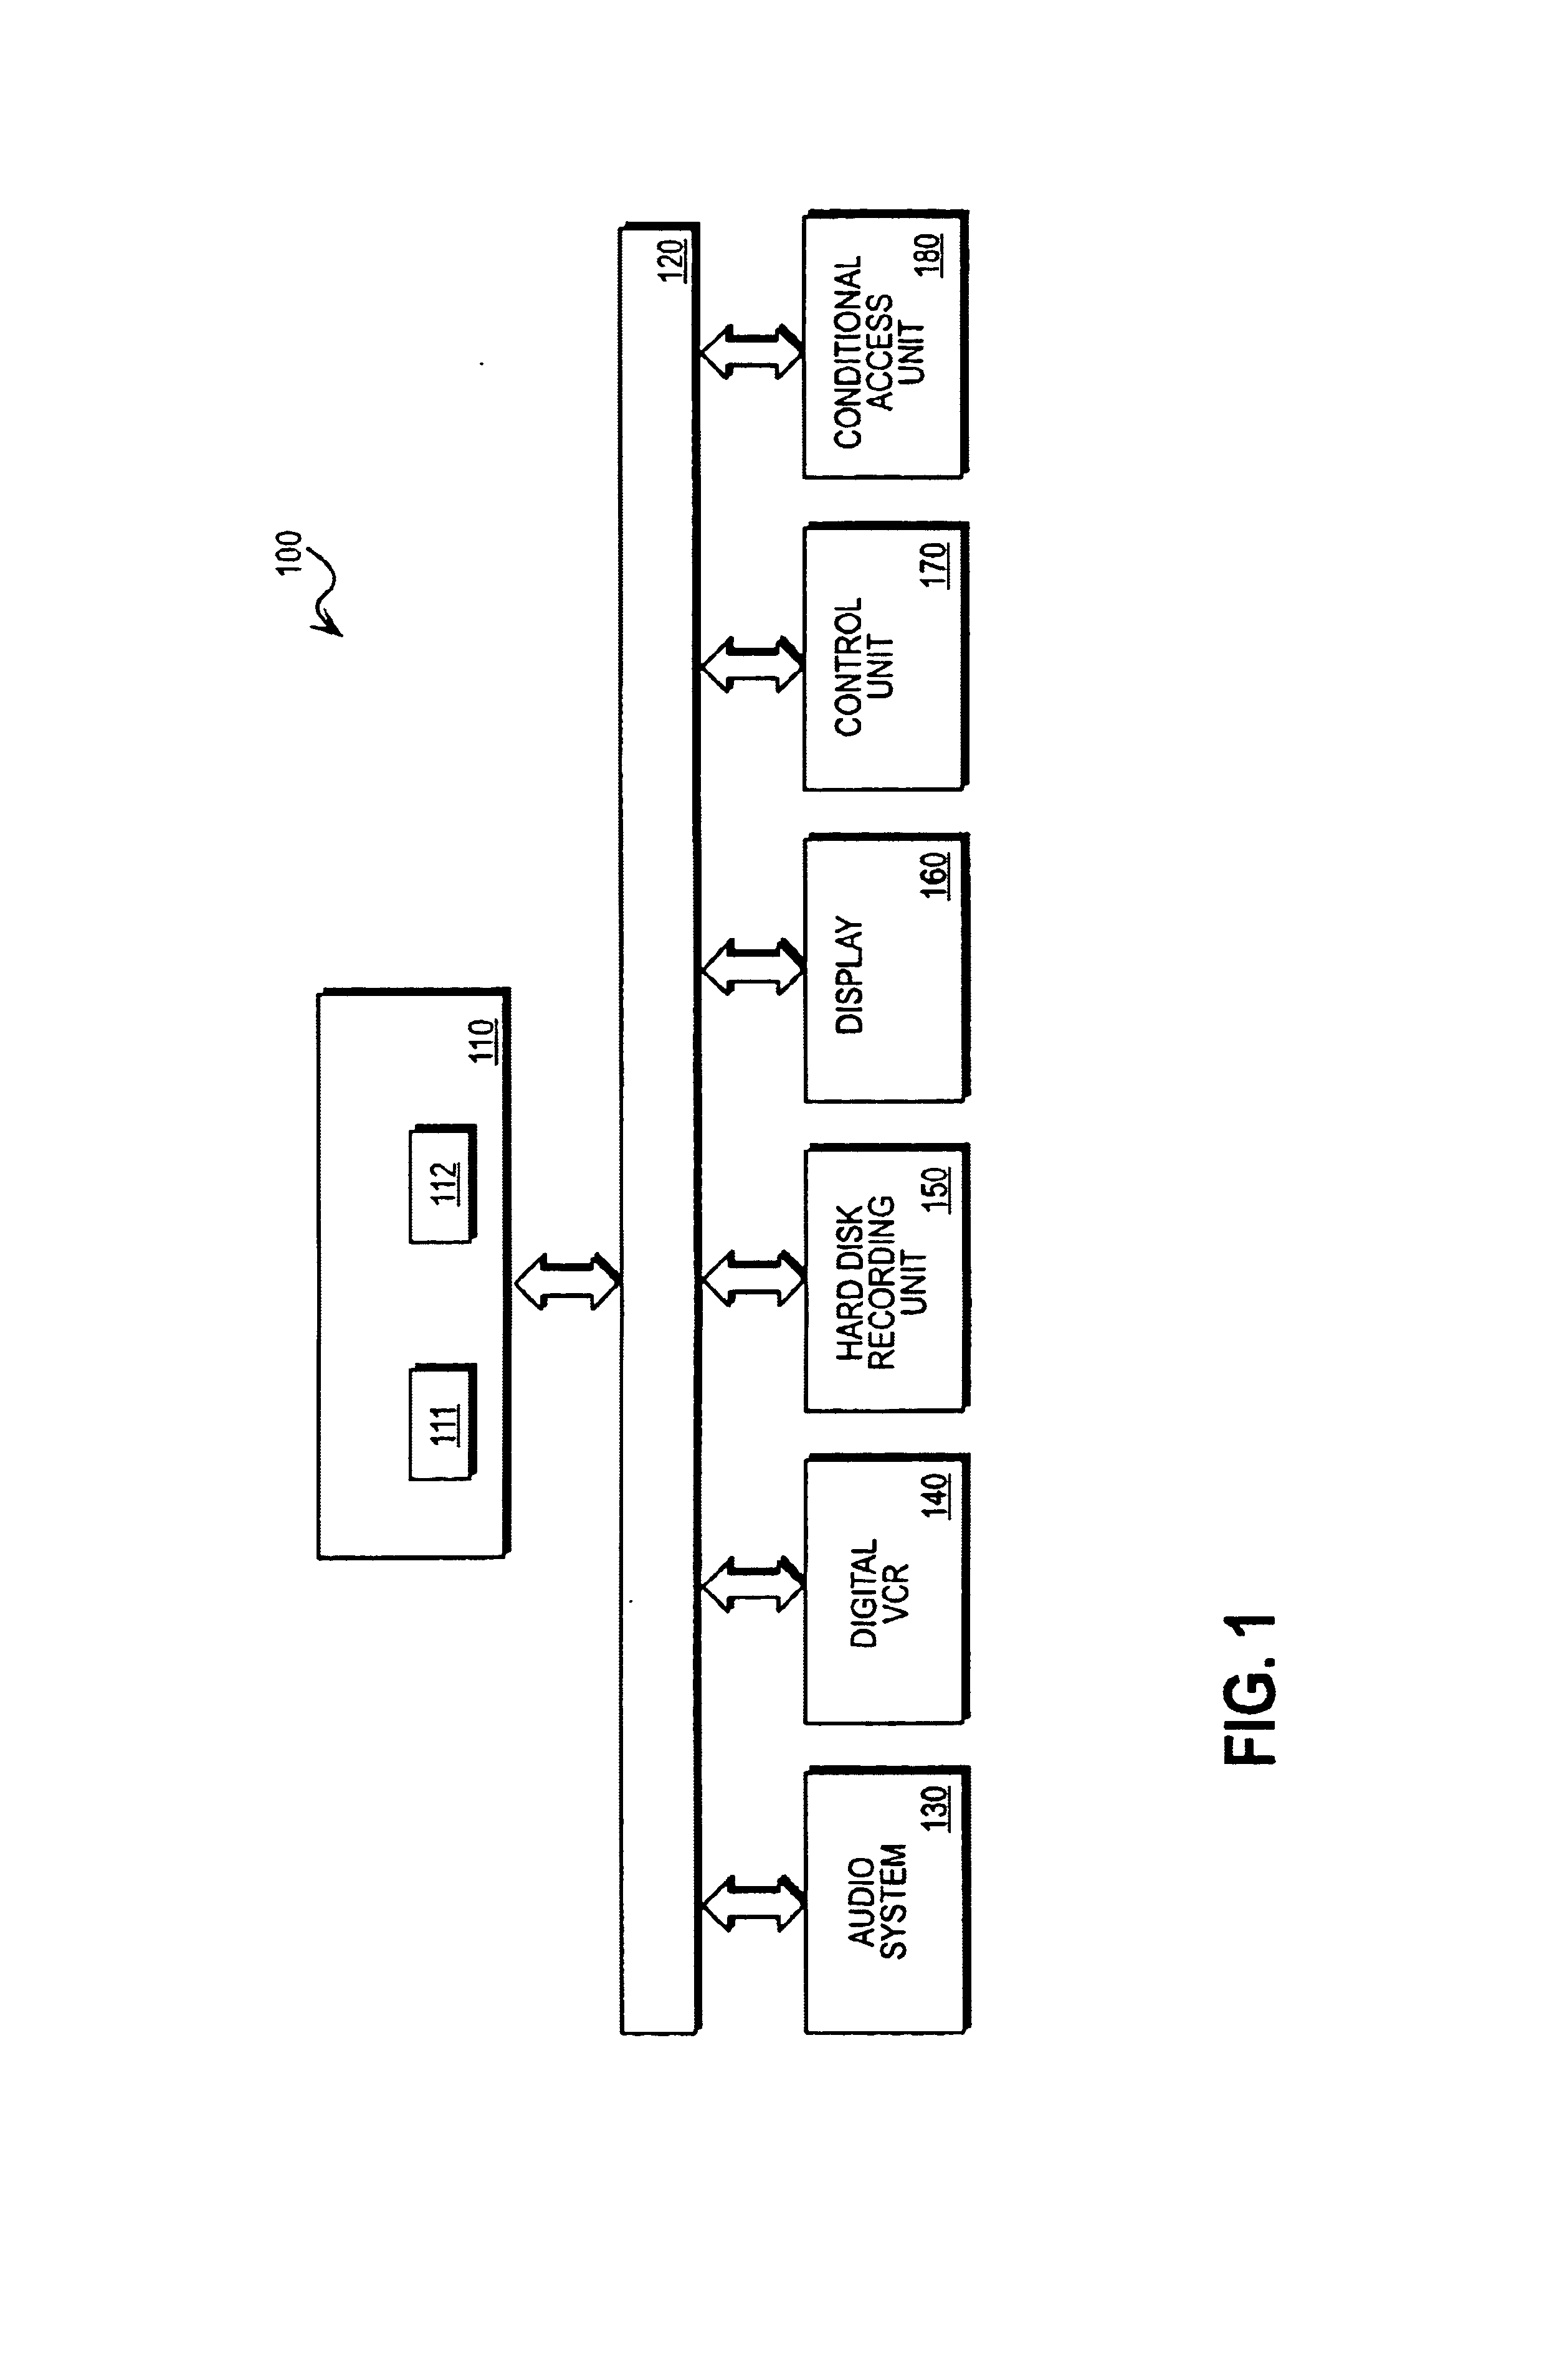 Method and apparatus for implementing revocation in broadcast networks